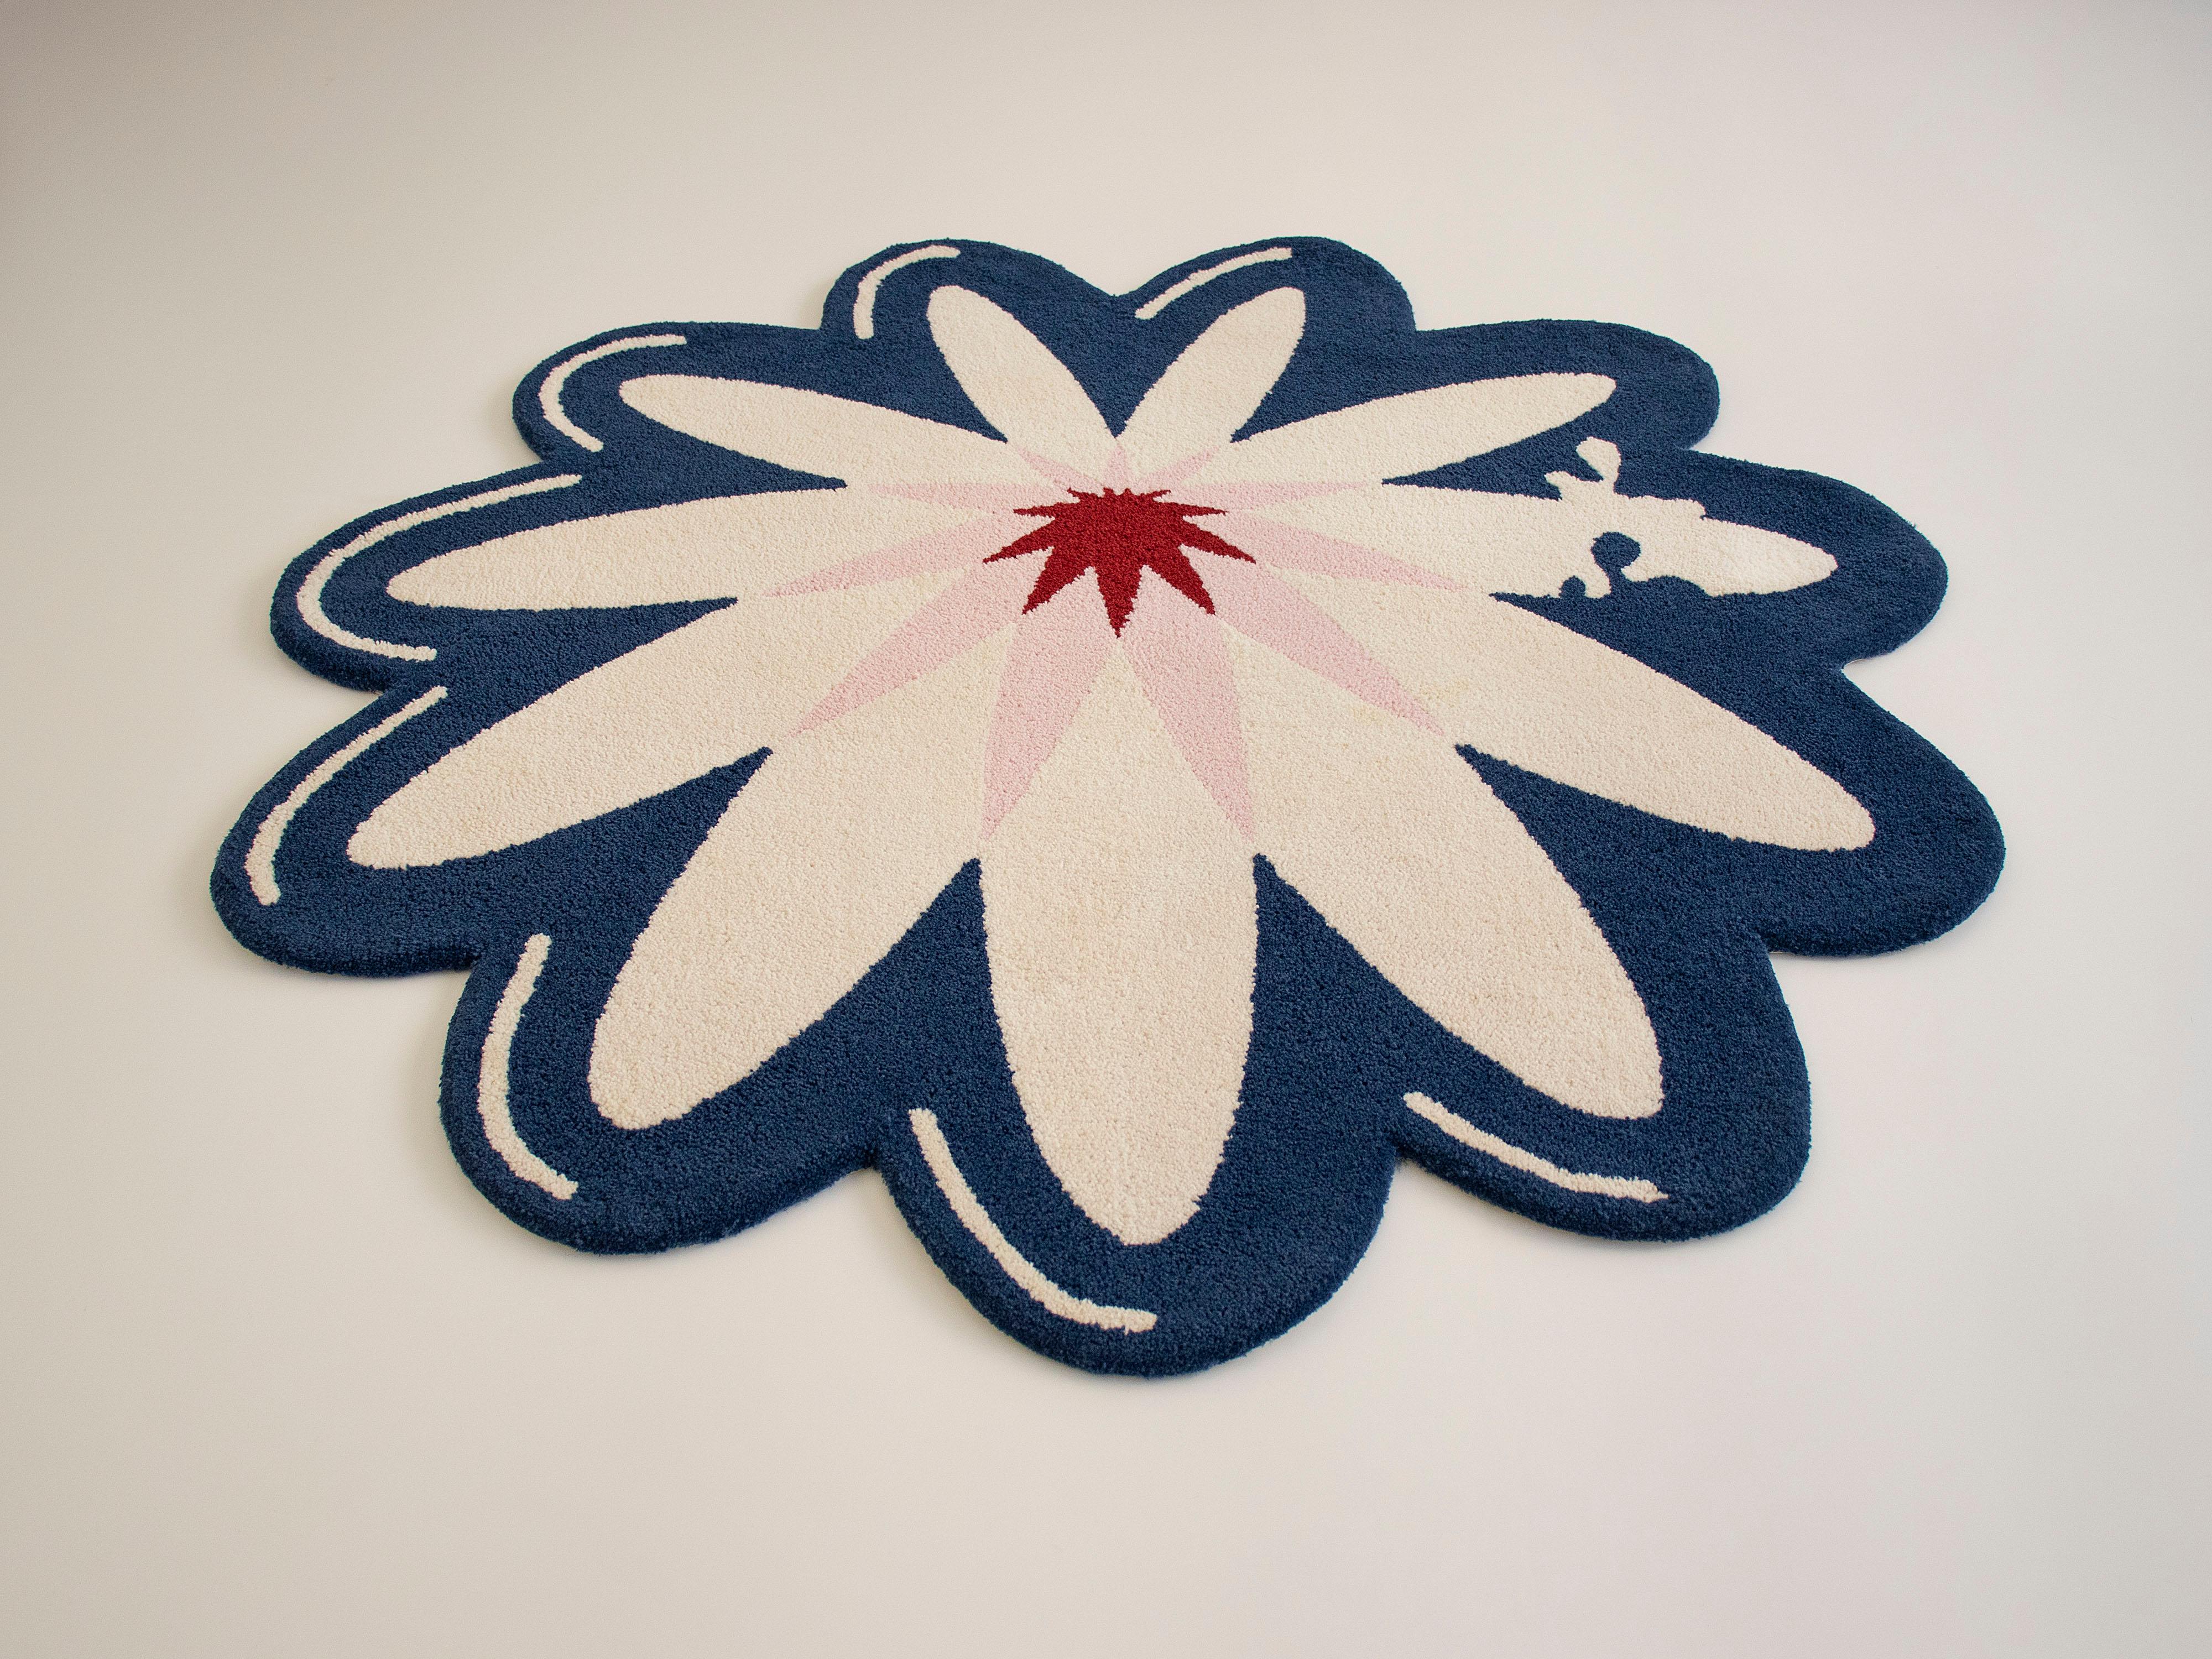 Round Blue, White & Red Flower Rug from Graffiti Collection by Paulo Kobylka In Fair Condition For Sale In Londrina, Paraná